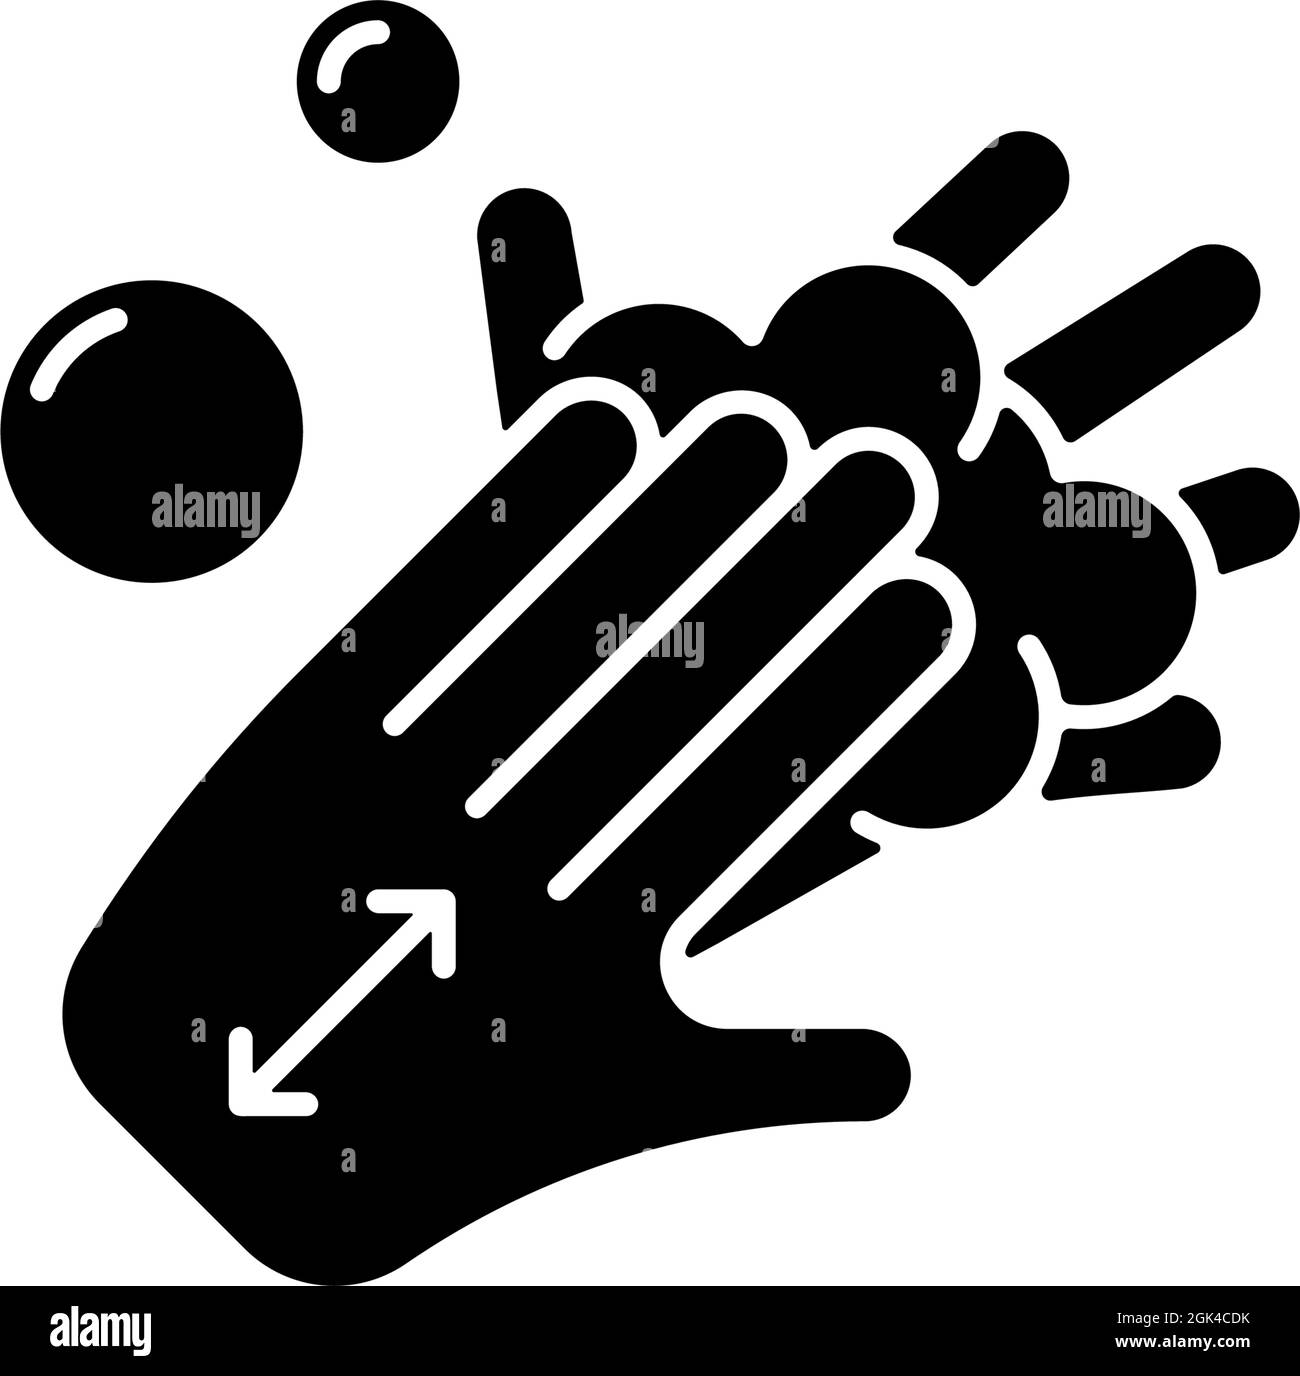 Lathering back of hands black glyph icon Stock Vector